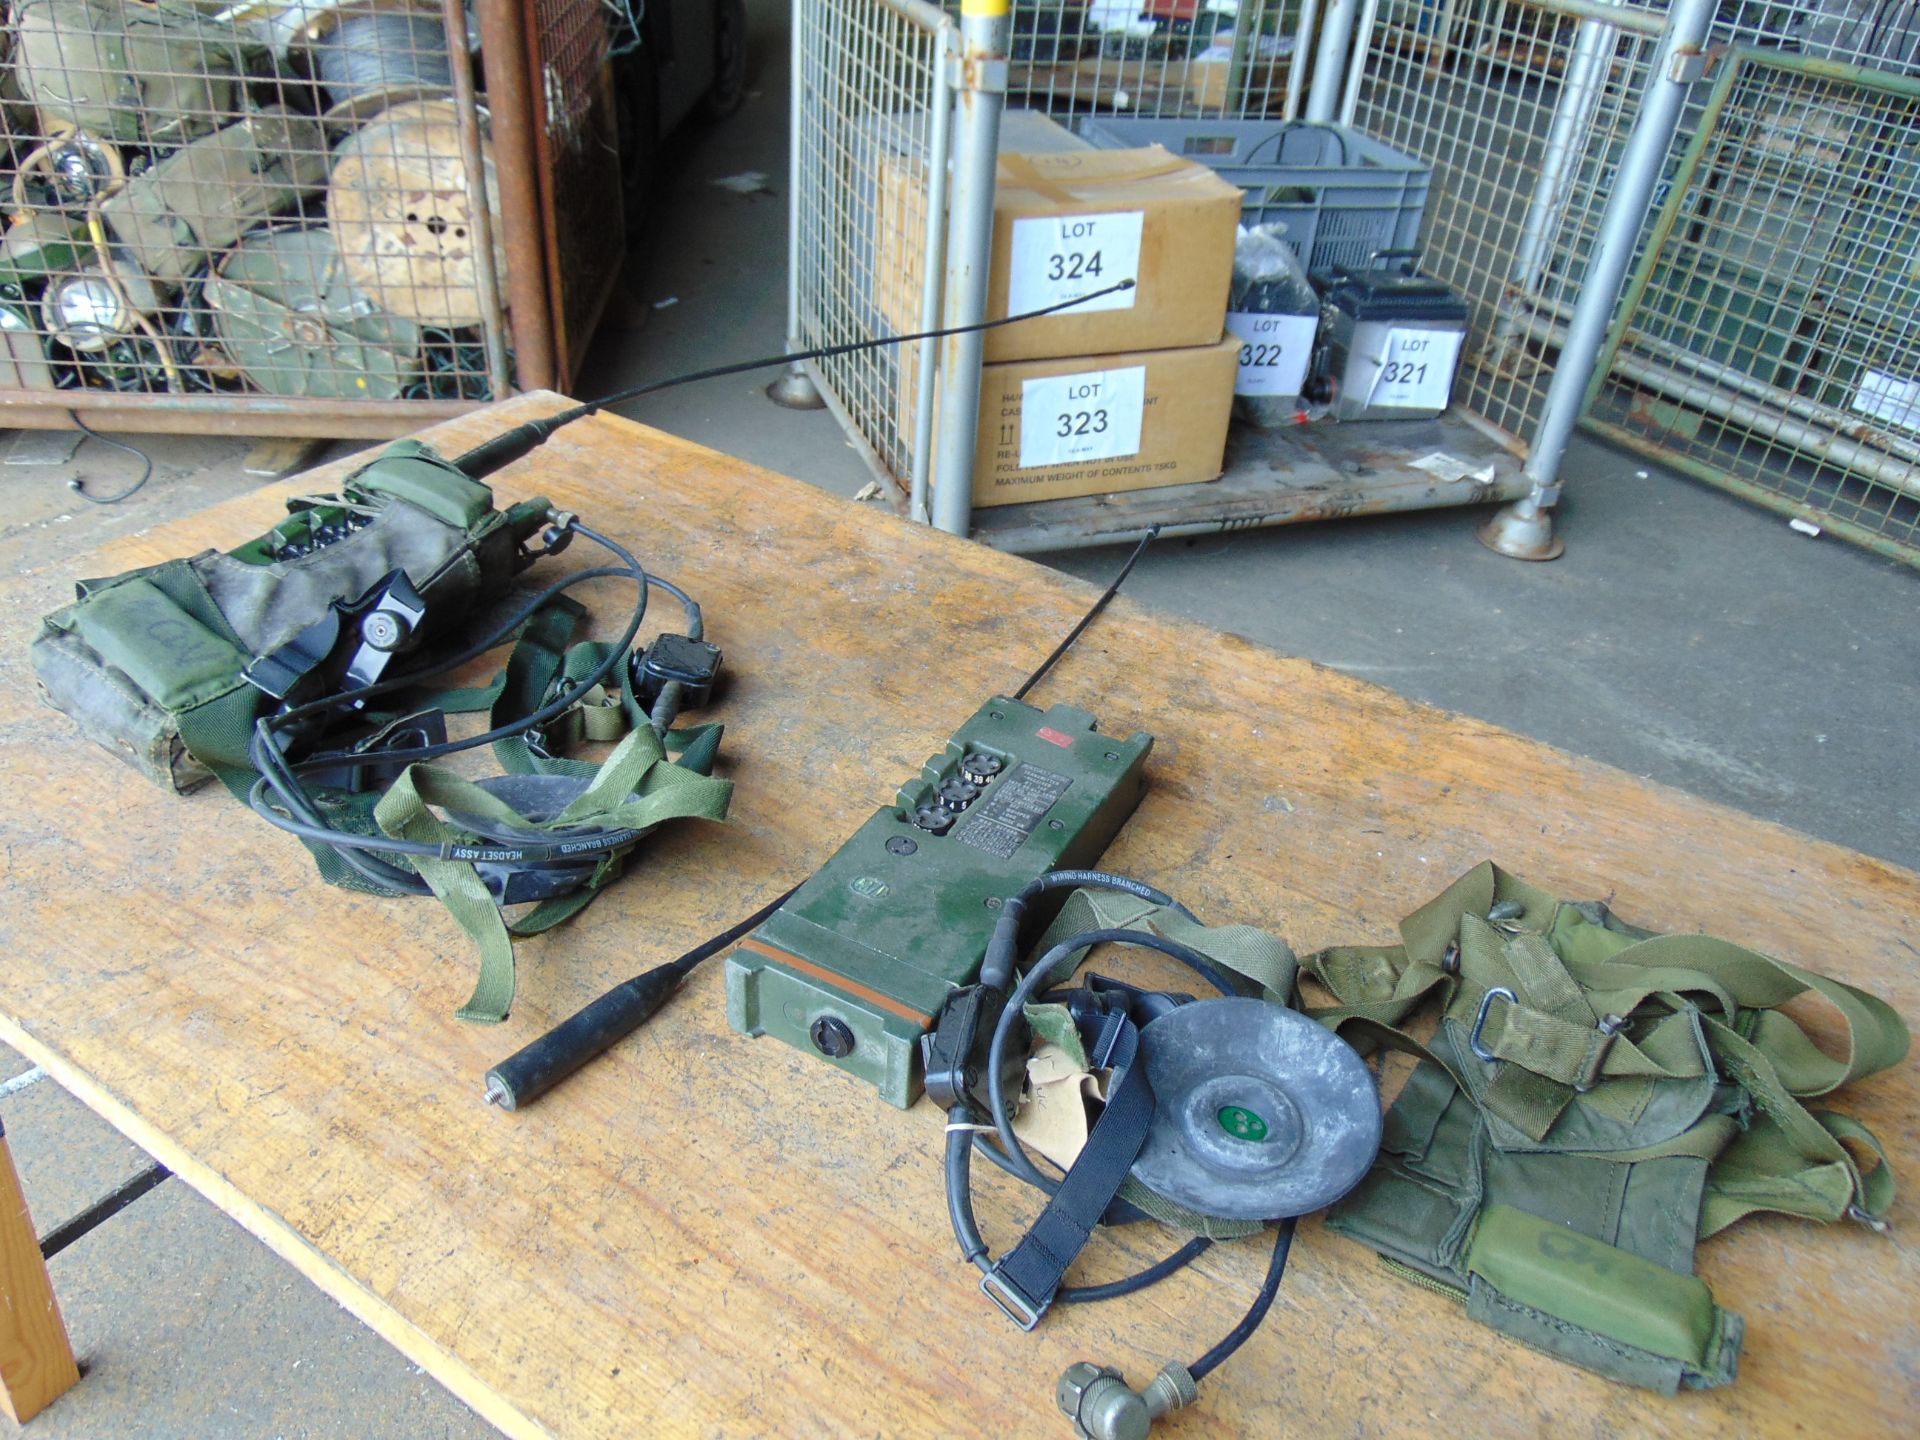 2 x RT 349 British Army Transmitter / Receiver c/w Pouch, Headset, Antenna and Battery Cassette - Image 3 of 4